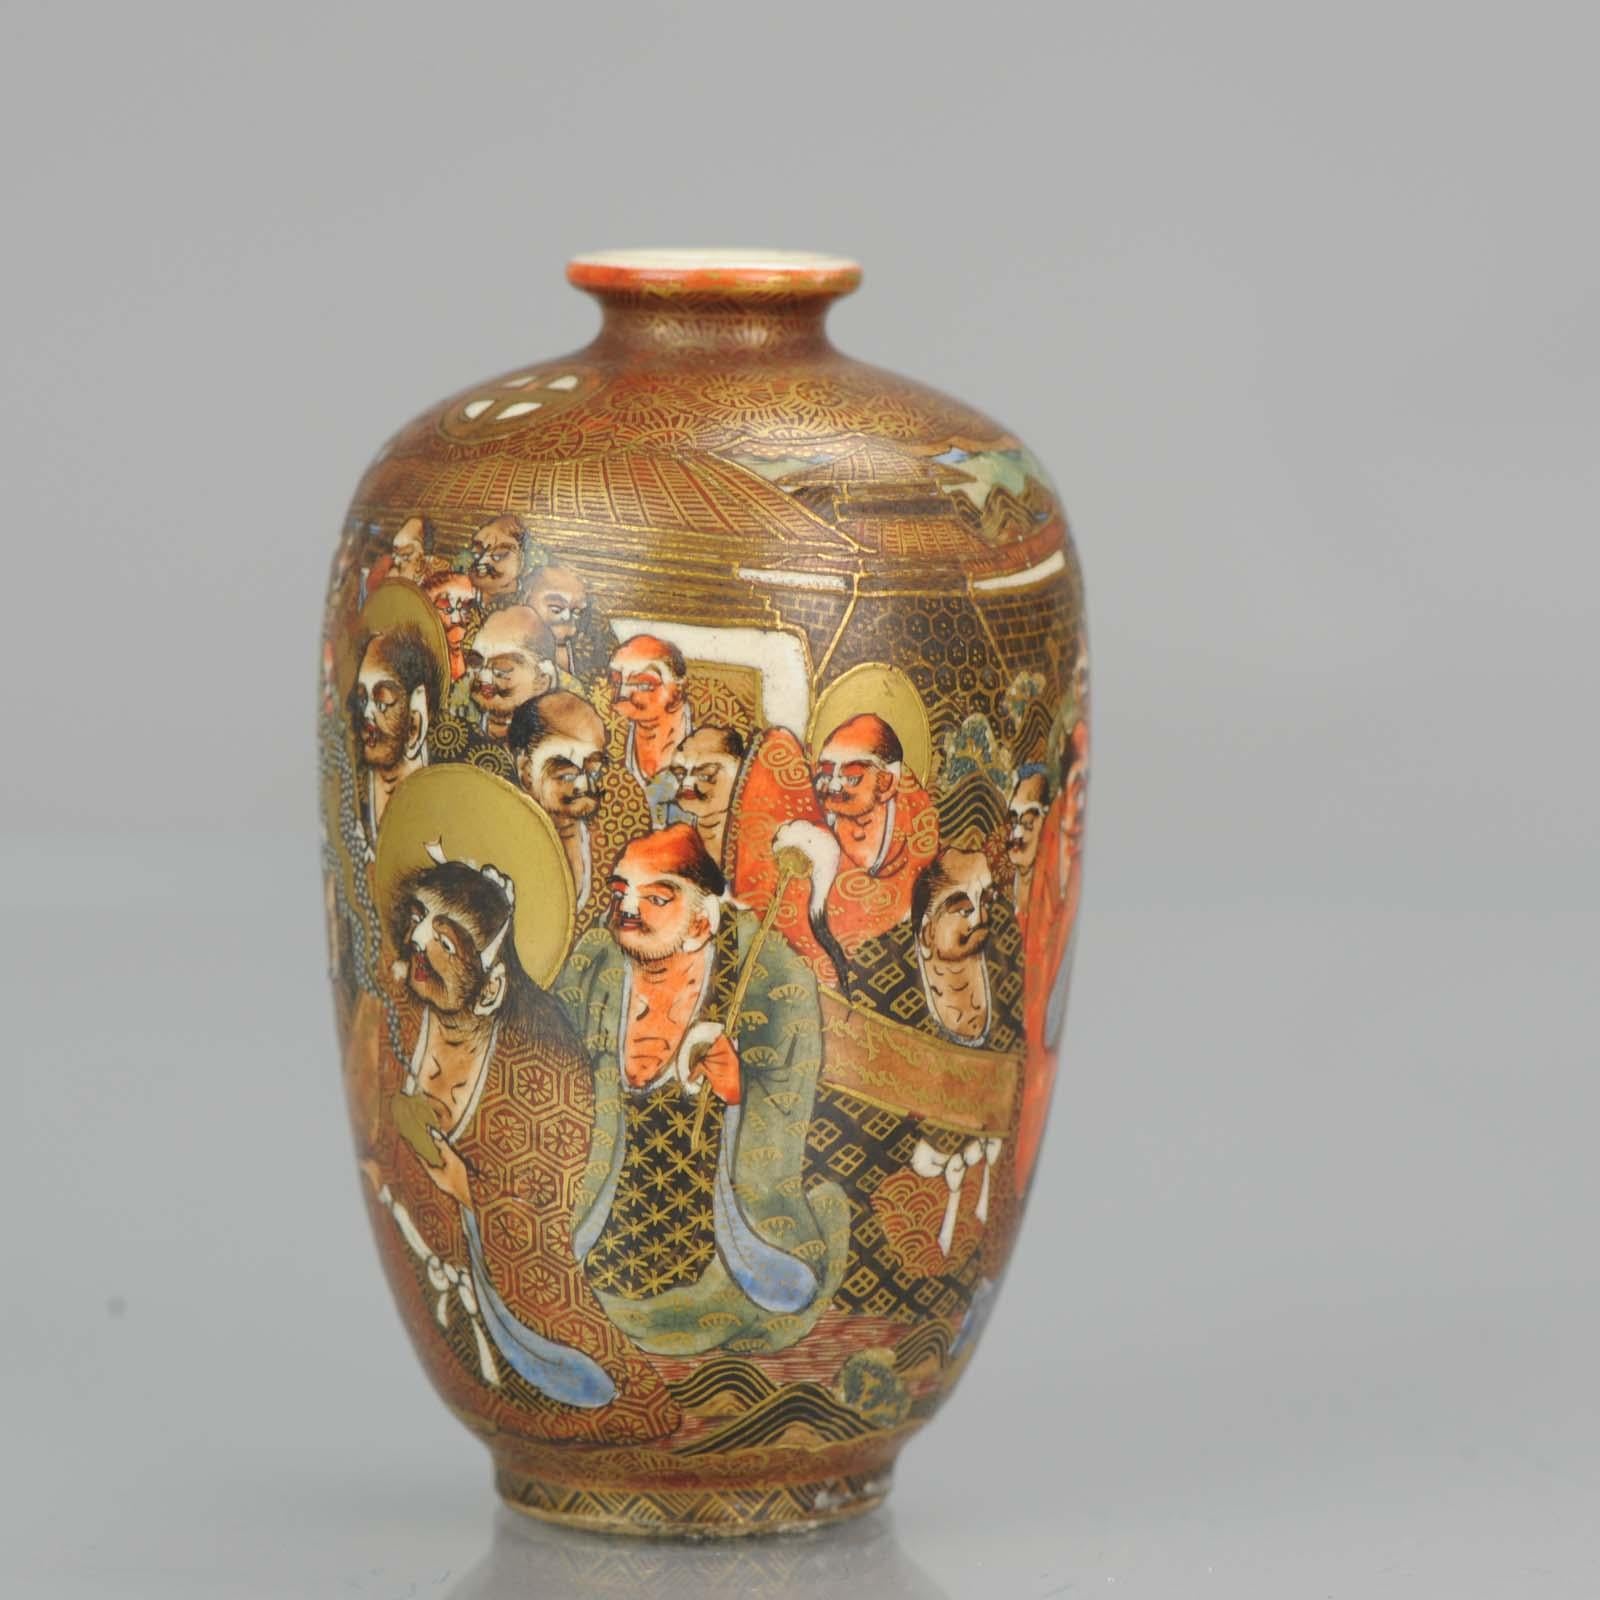 Antique 19th Century Japanese Satsuma Vase Japan Arhat Figures Meiji Period In Excellent Condition For Sale In Amsterdam, Noord Holland